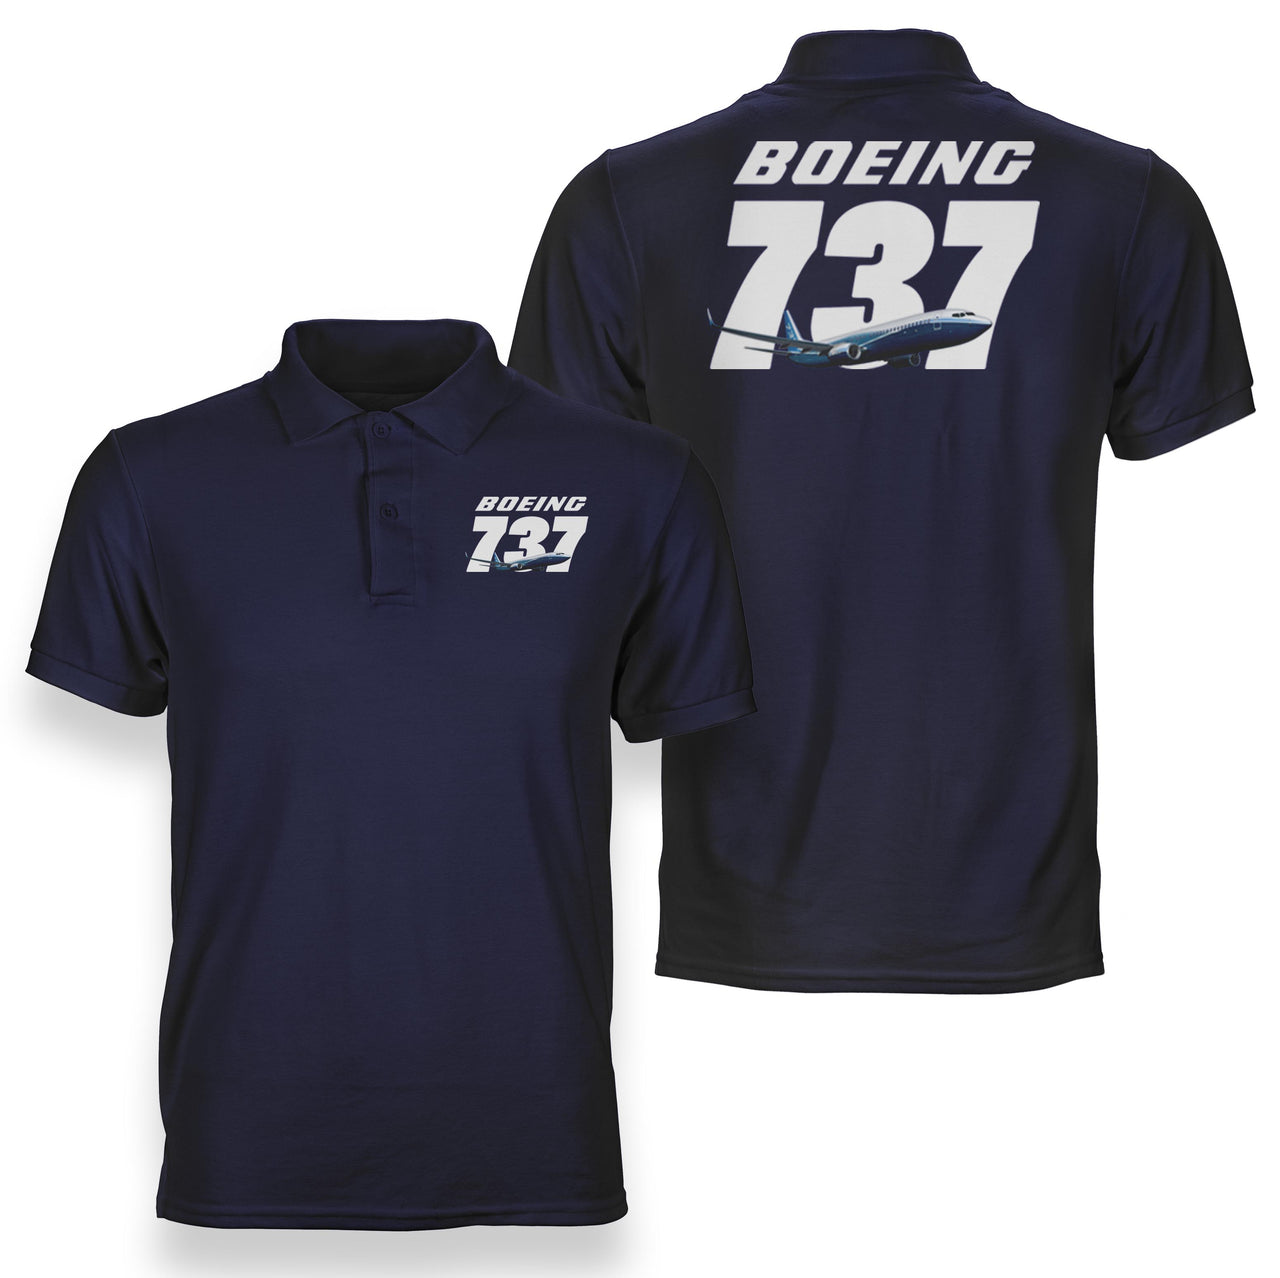 Super Boeing 737+Text Designed Double Side Polo T-Shirts